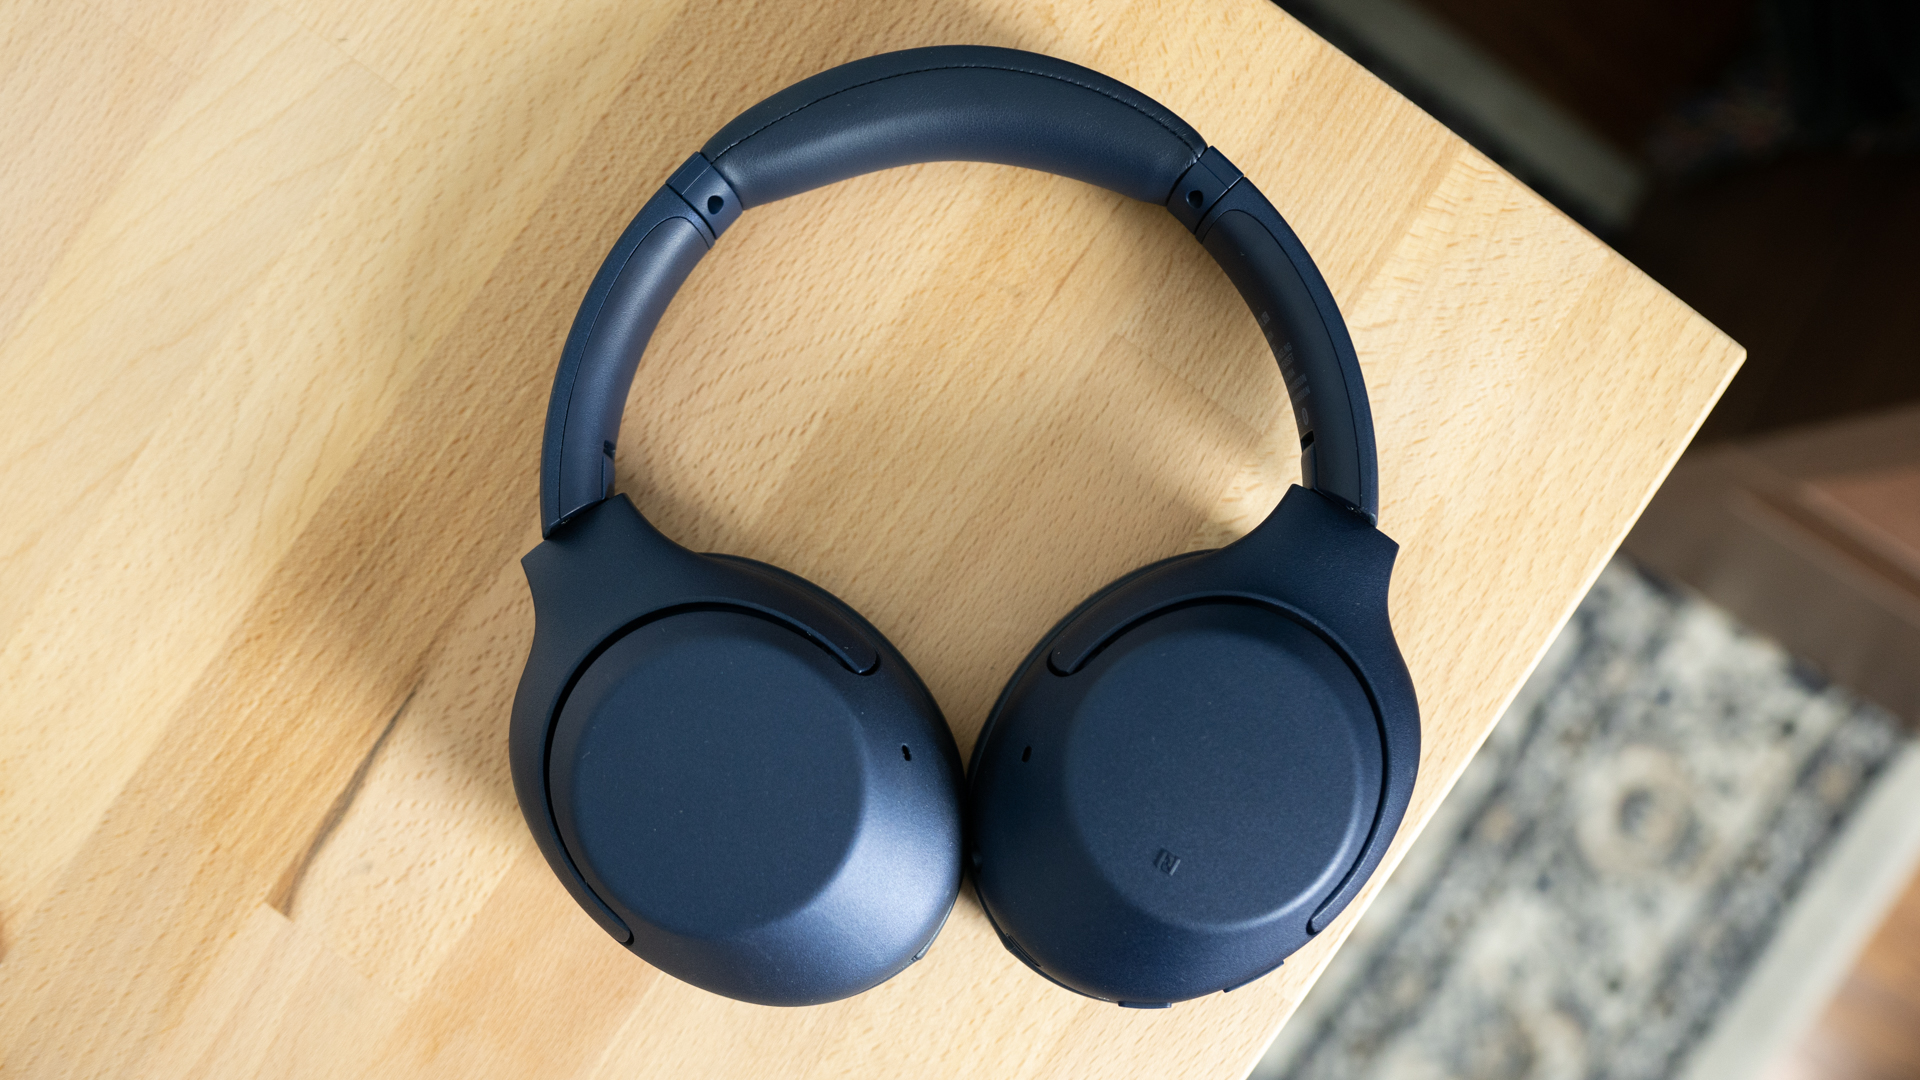 Sony WH-XB900N review: Lightweight, bass-heavy - SoundGuys